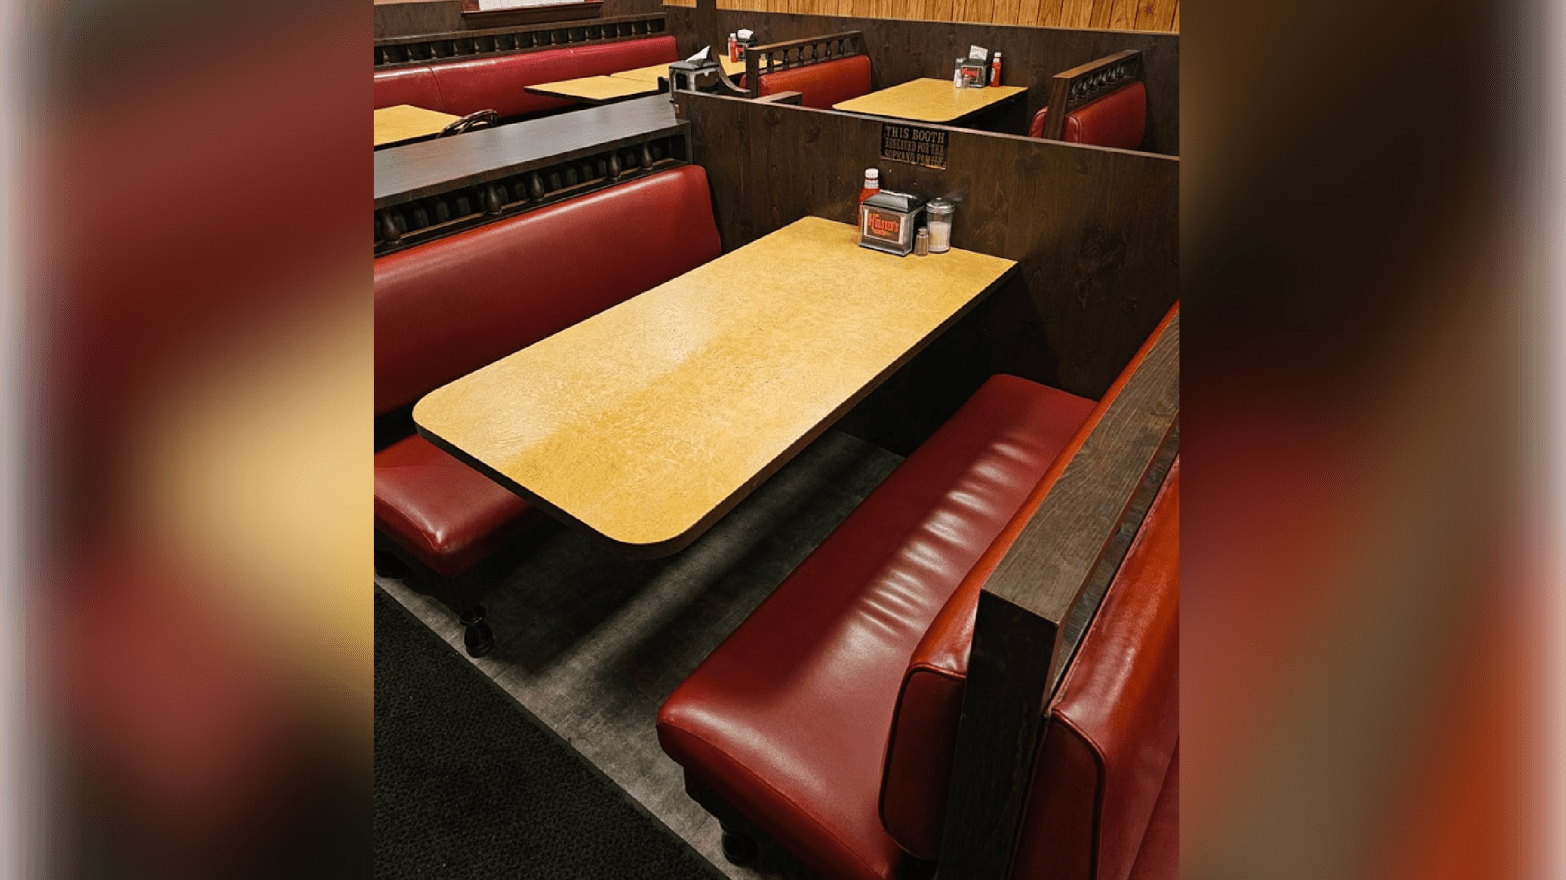 The famous booth inside Holsten’s Diner where the final scene of The Sopranos was filmed.